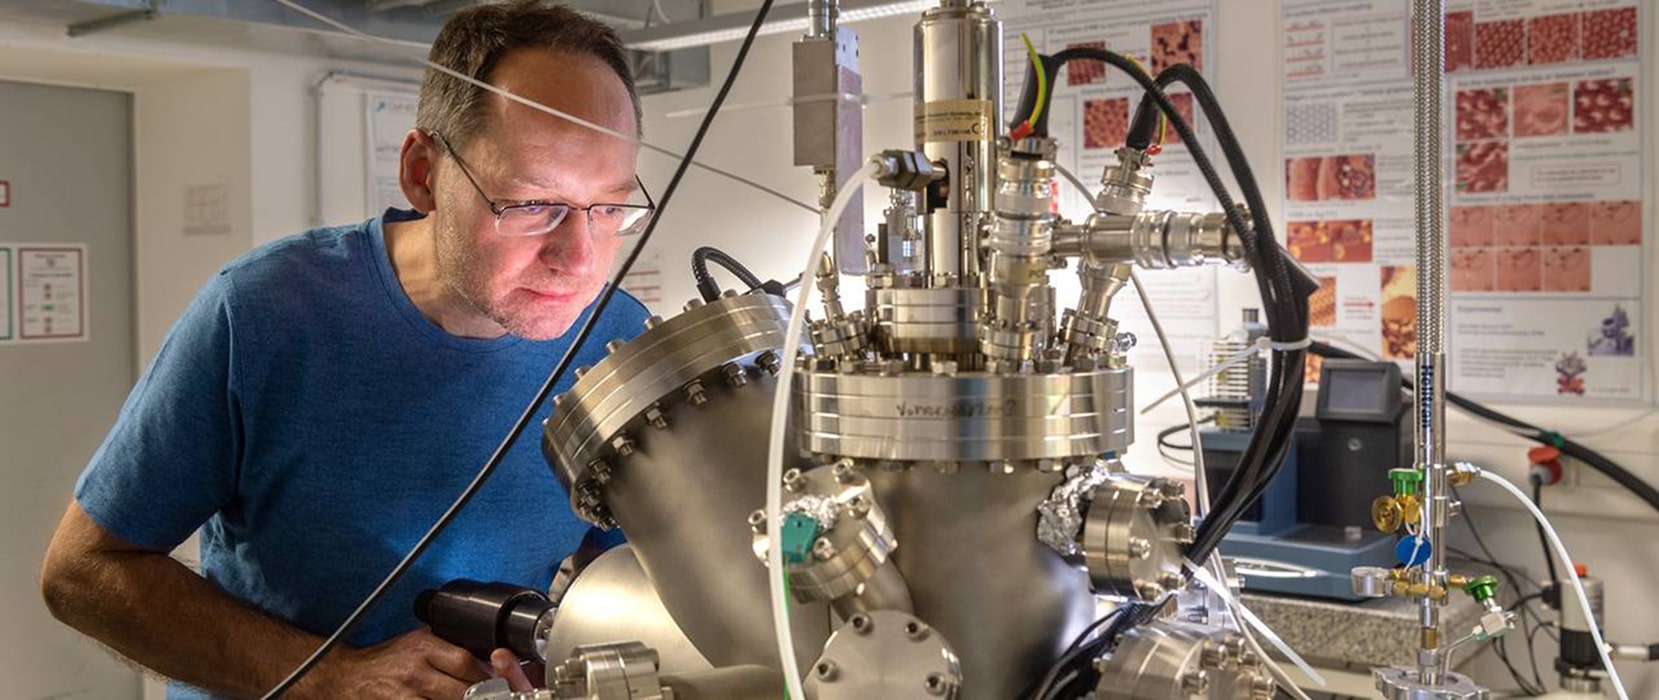 Markus Lackinger transferring a sample inside the ultra-high vacuum chamber by means of a vacuum grabber. This vacuum chamber contains all facilities for preparing and analyzing samples under vacuum